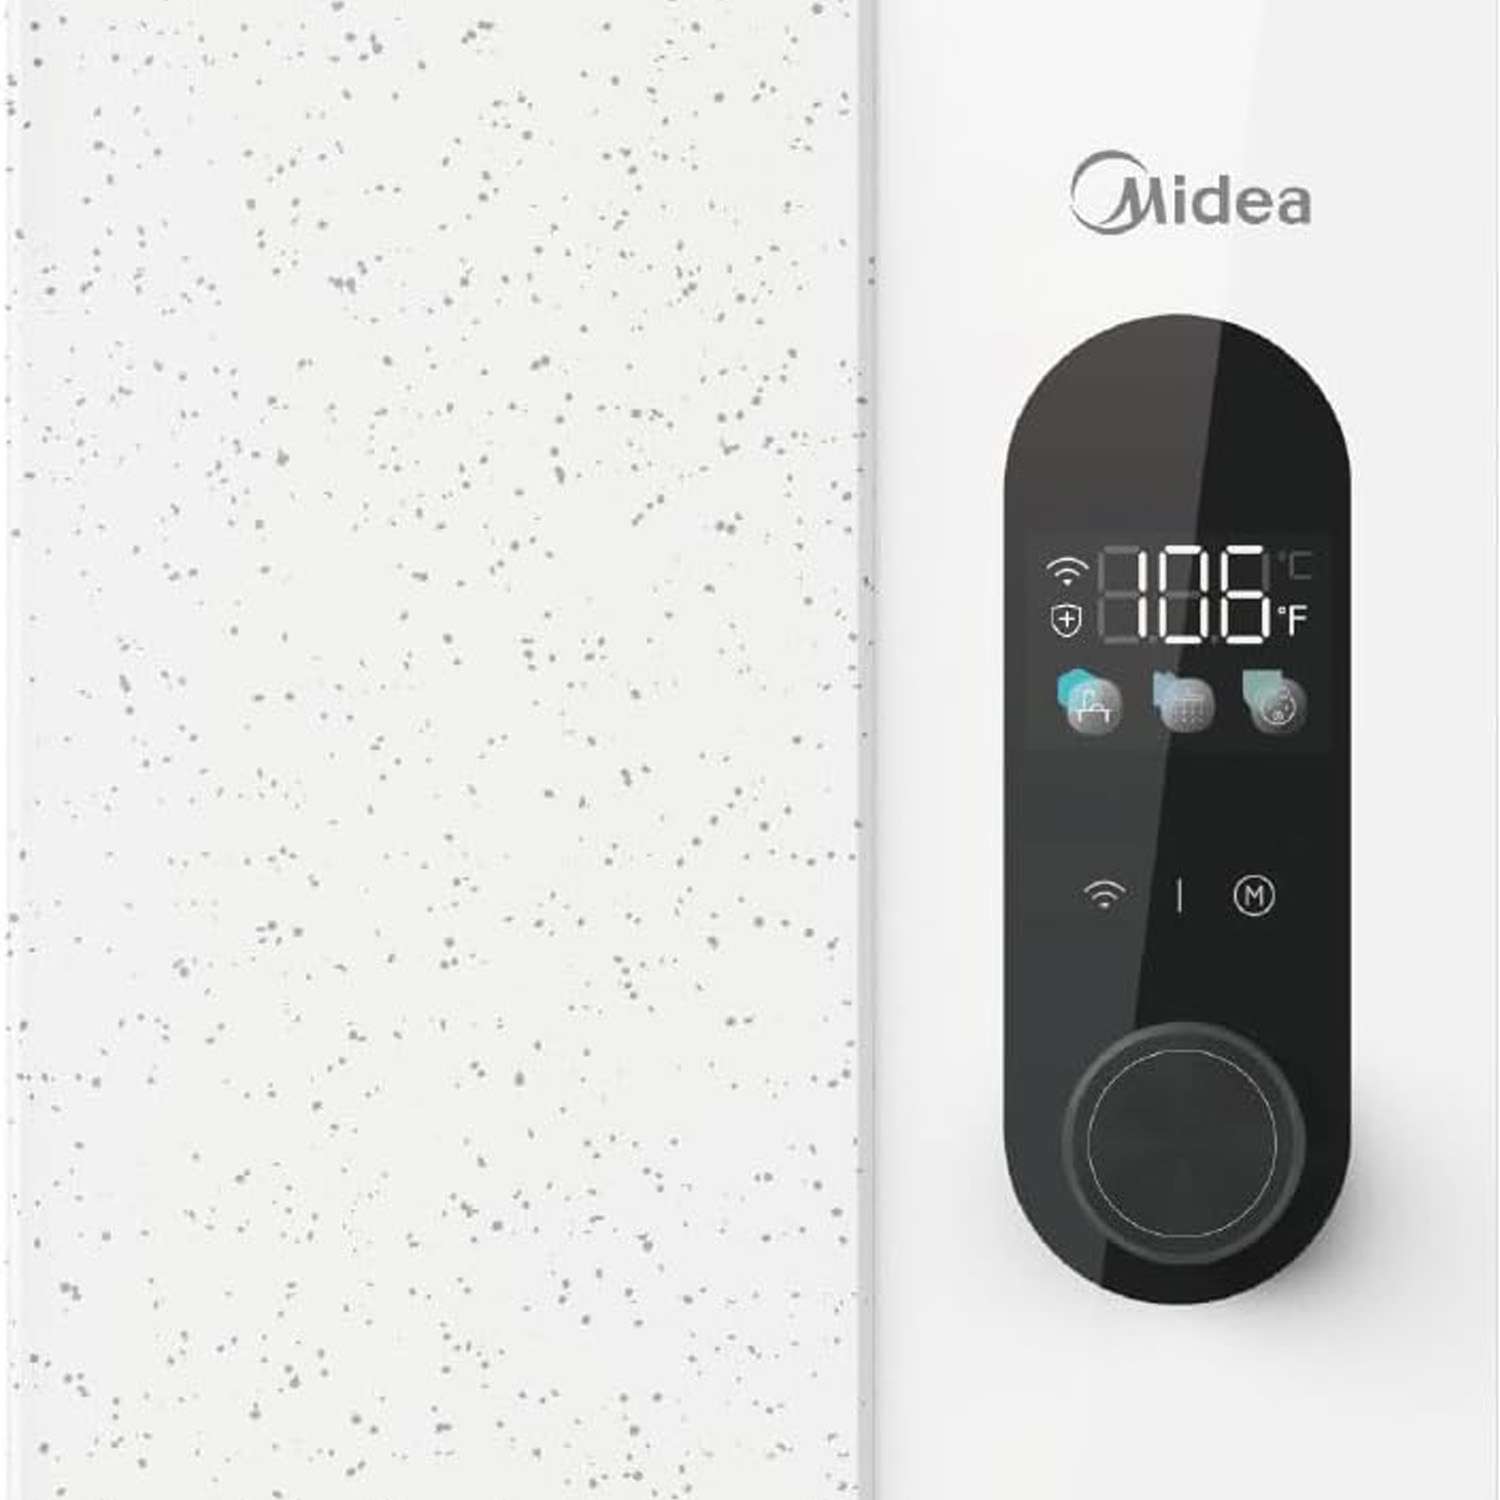 Midea 13KW Electric Tankless Water Heater, Touch Control, Wi-Fi Control, LED Display, Child Mode, 240 Volts with Automatic Power Modulation, On-demand Hot Water, White